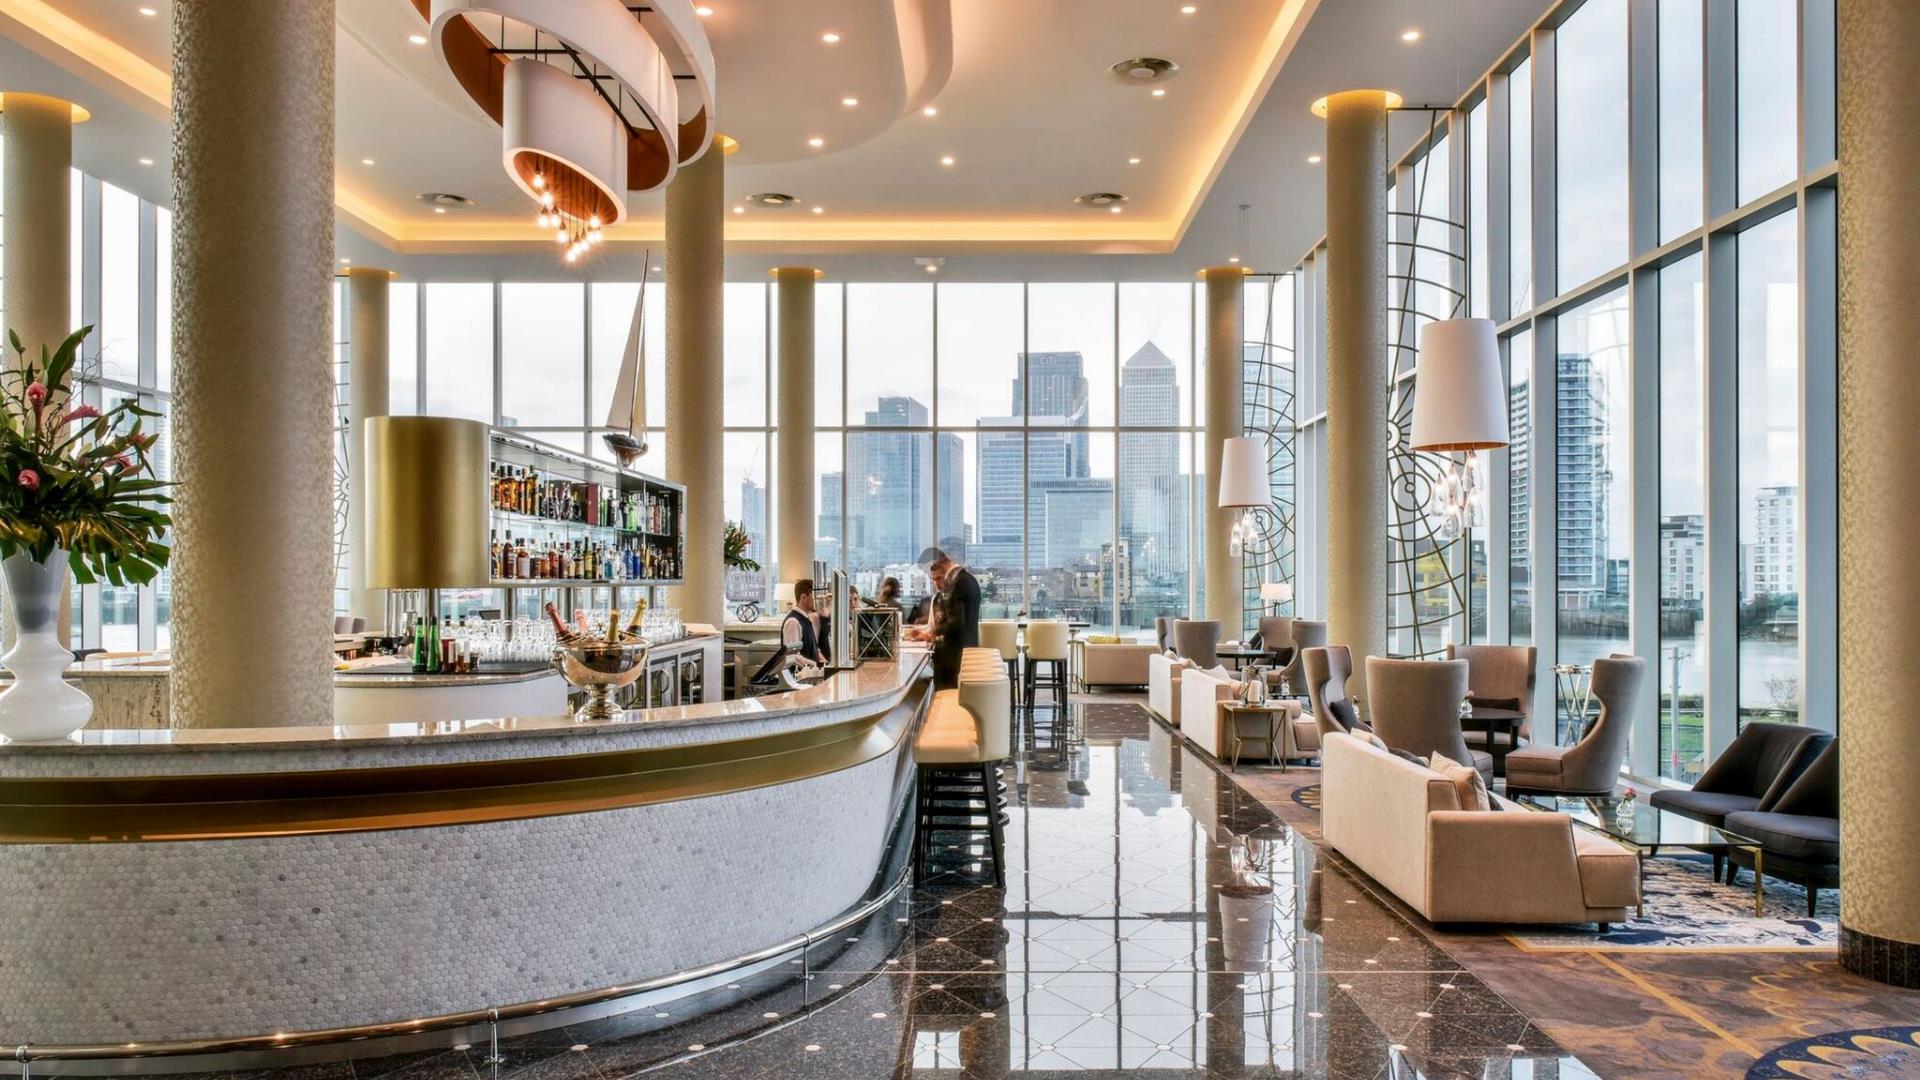 The beautiful interior of the Clipper Bar at the InterContinental London - The O2 on Greenwich Peninsula with central bar and floor to ceiling windows and views of the river and Canary Wharf.